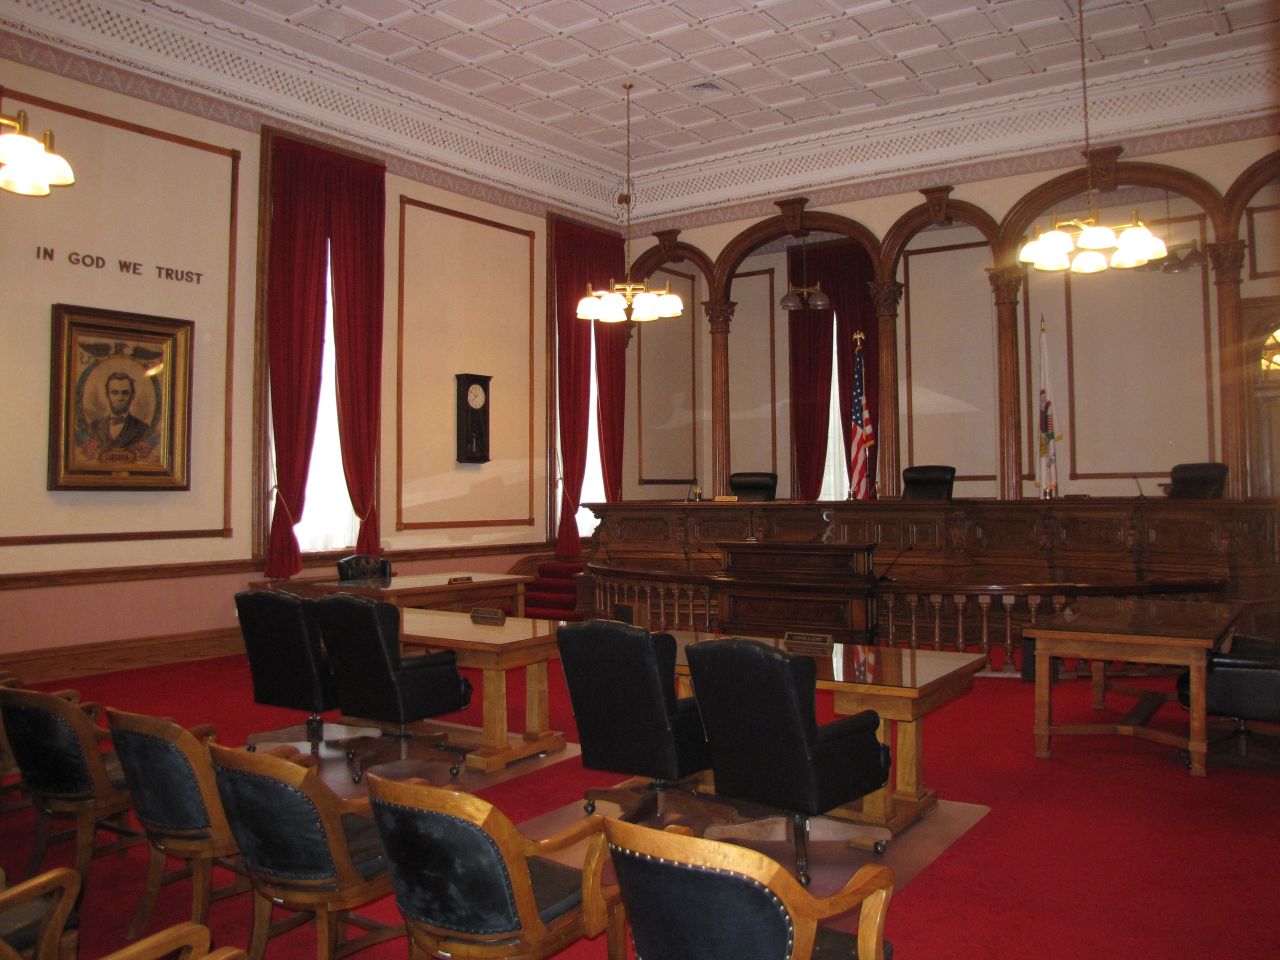 The courtroom